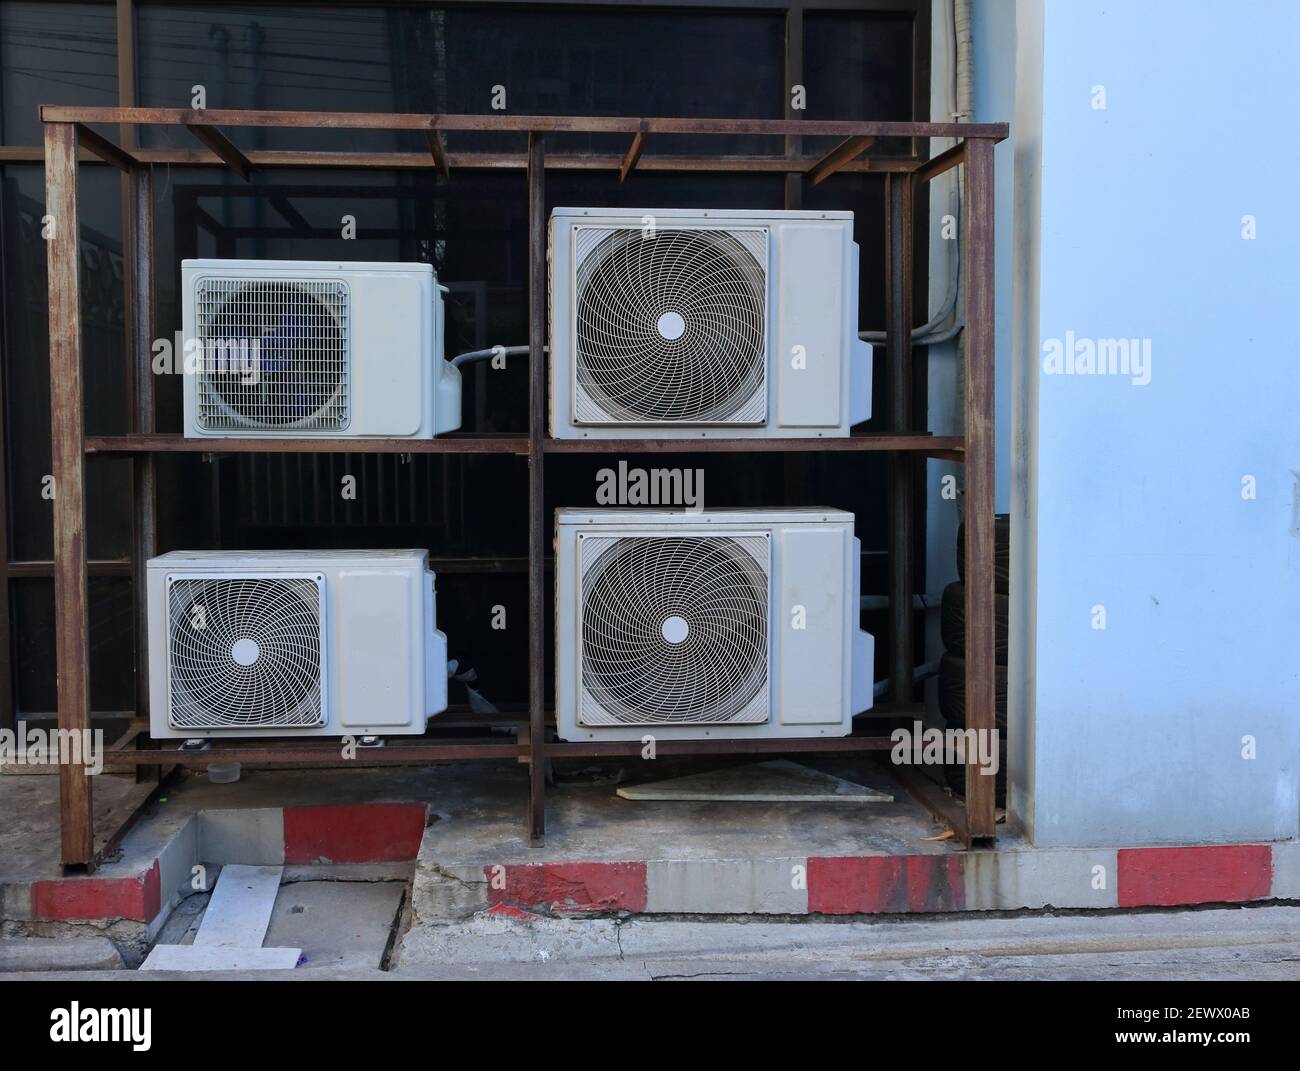 Closeup stack of condensing units installed on metal frame structure standing on sidewalk outside a building Stock Photo